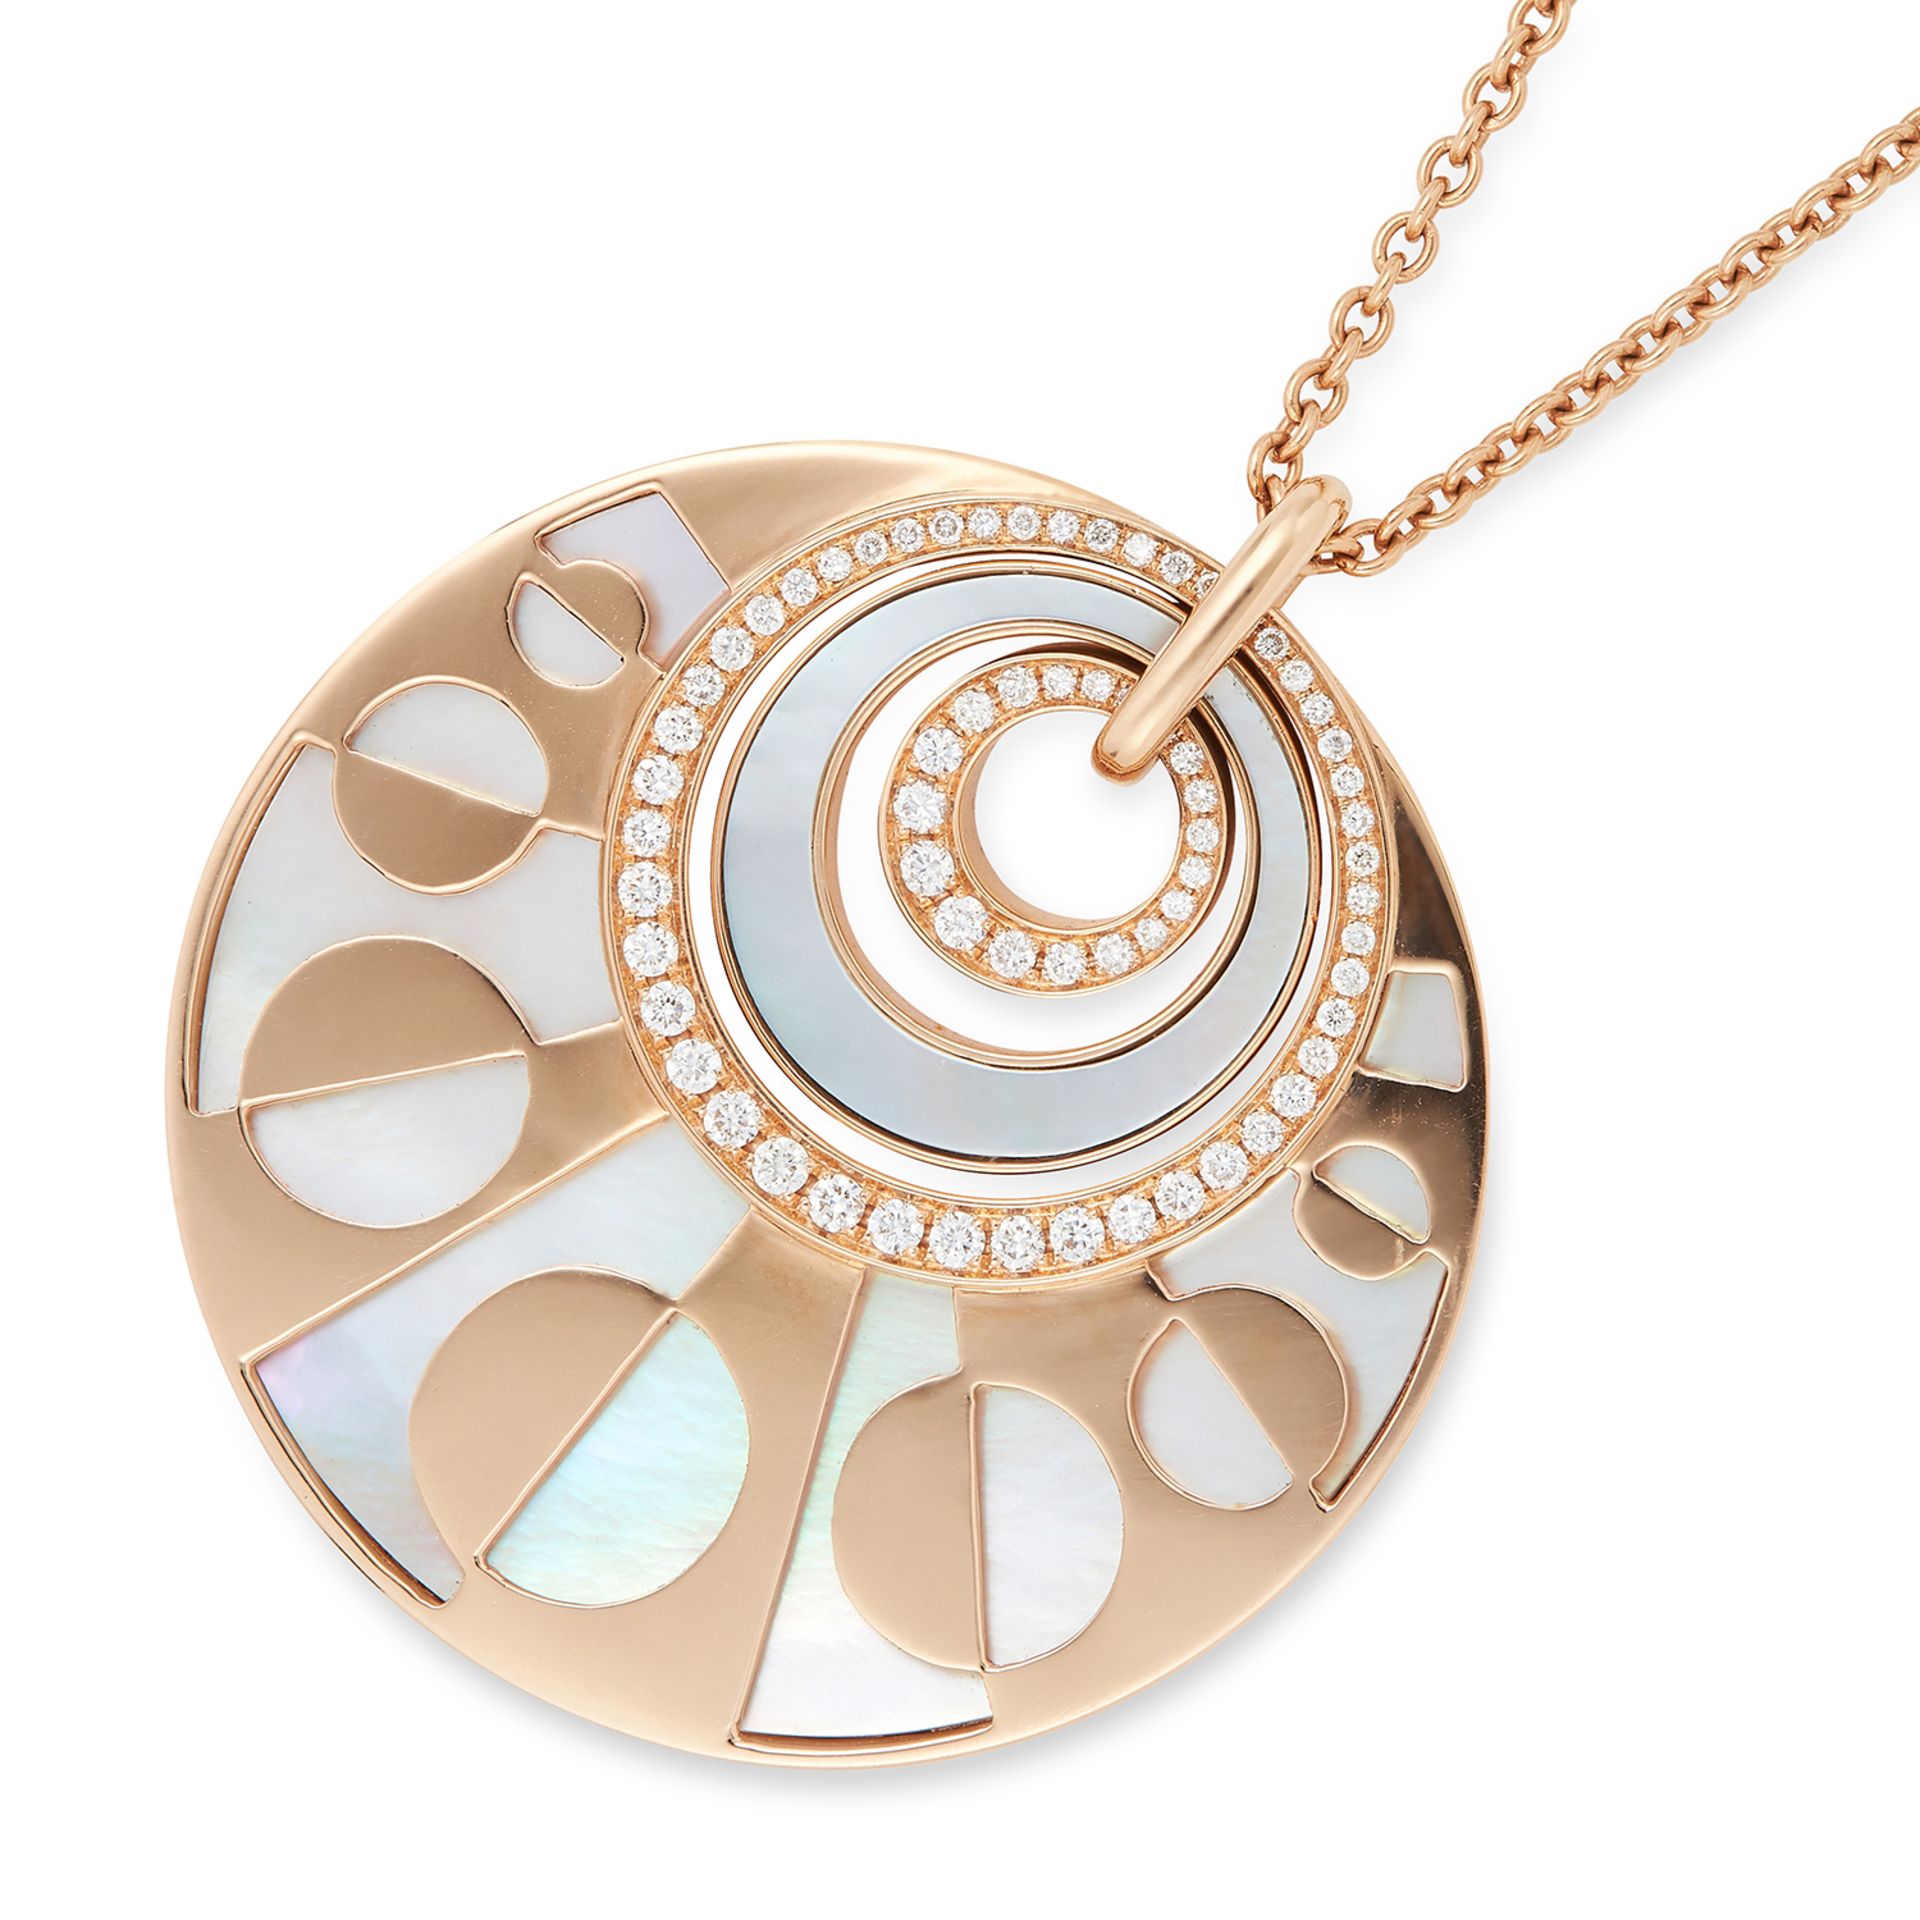 MOTHER OF PEARL AND DIAMOND INTARSIO PENDANT, BVLGARI set with polished mother of pearl and round